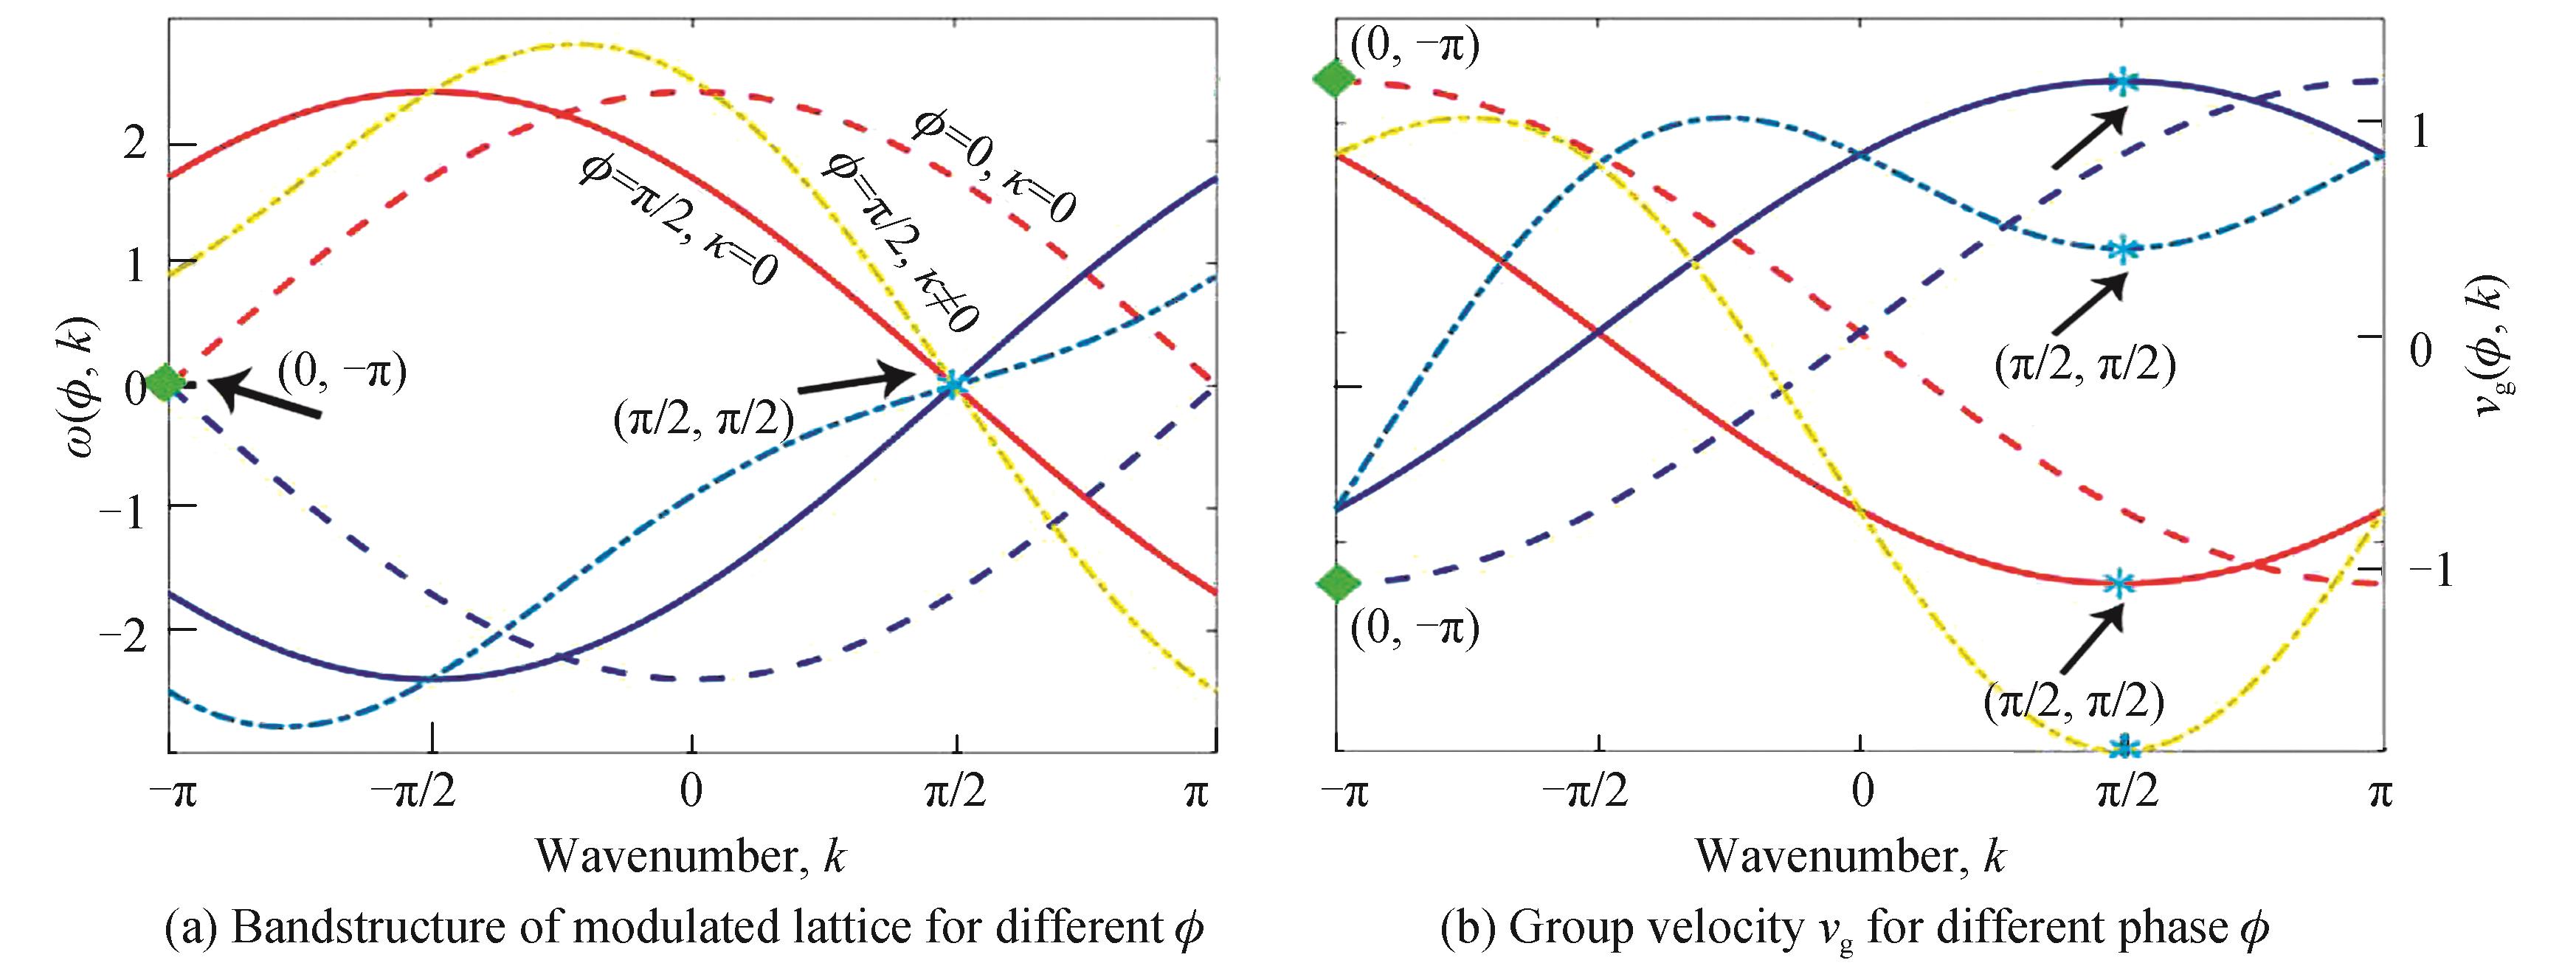 Band structure and group velocity of the one-dimensional photonic lattice with different modulation phase ϕ and next-nearest coupling κ